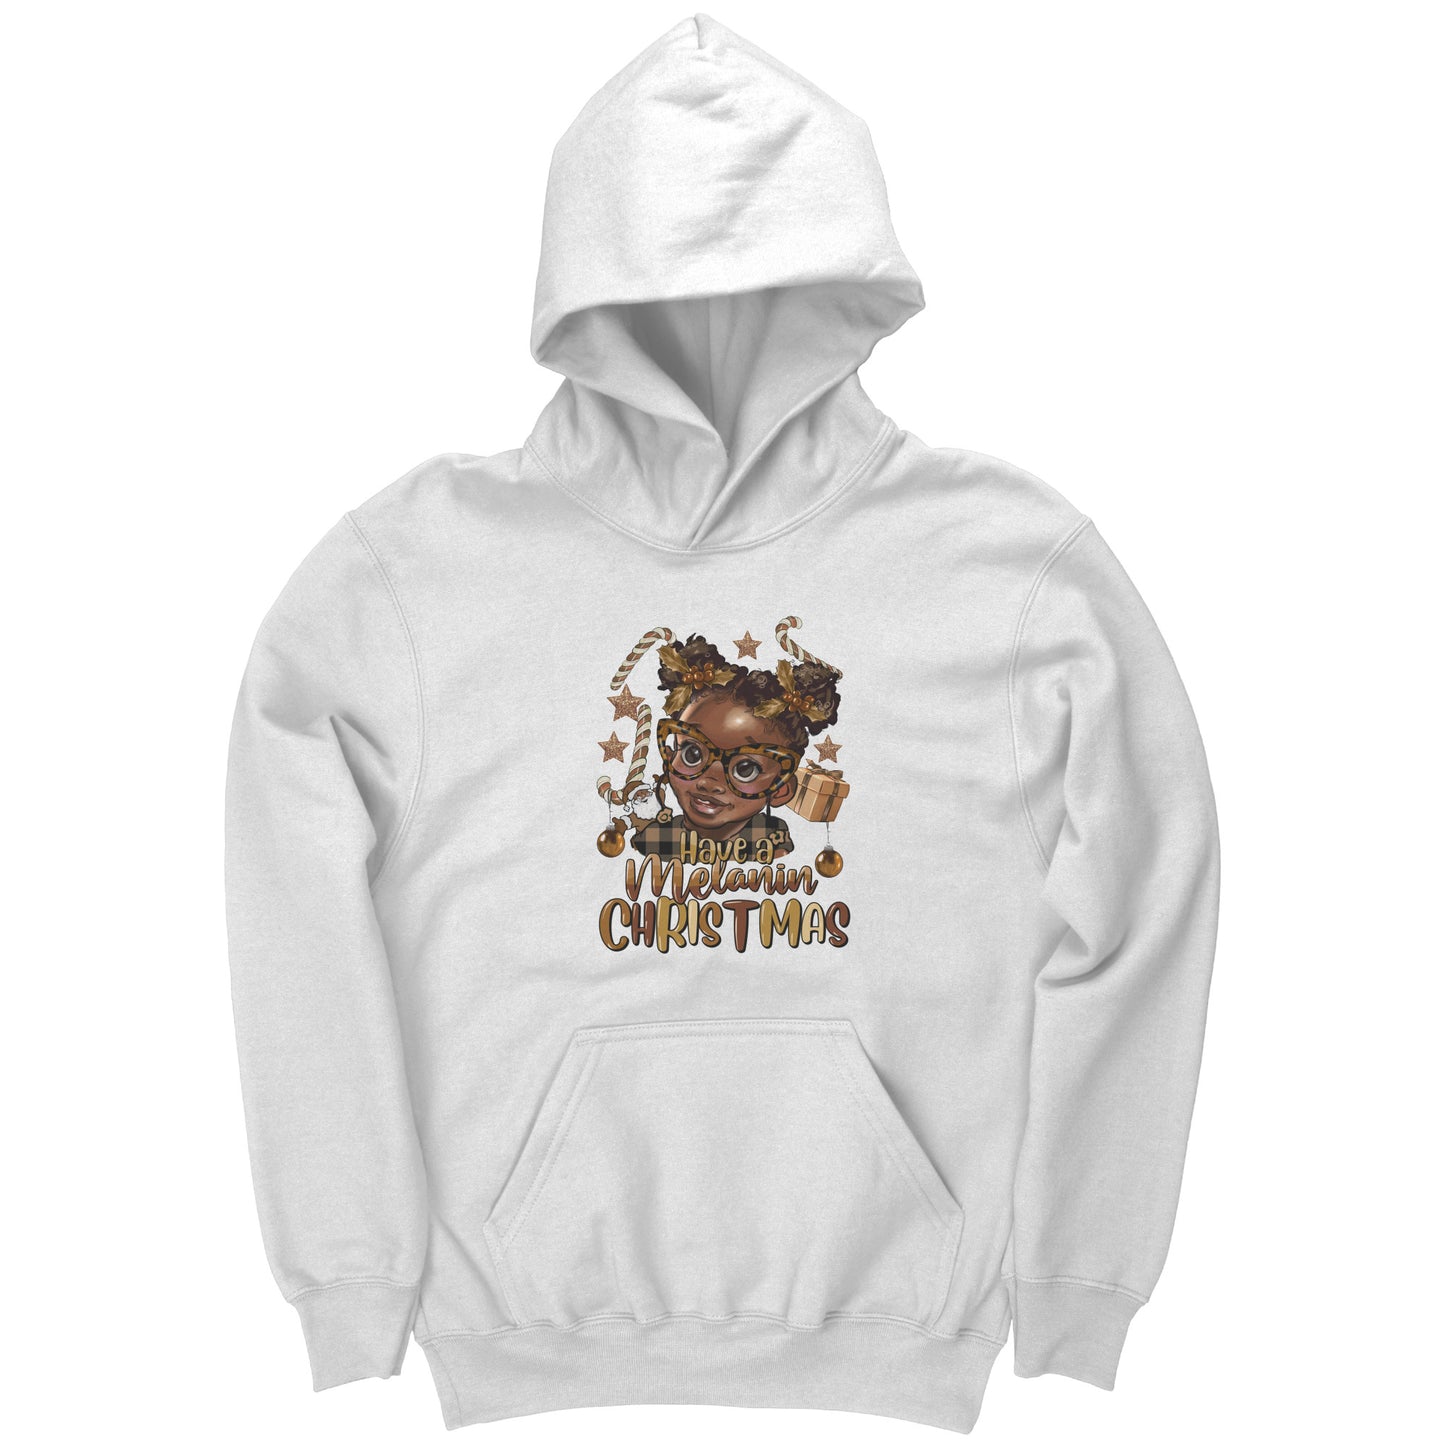 Have a Melanin Christmas Girl Youth Hoodie